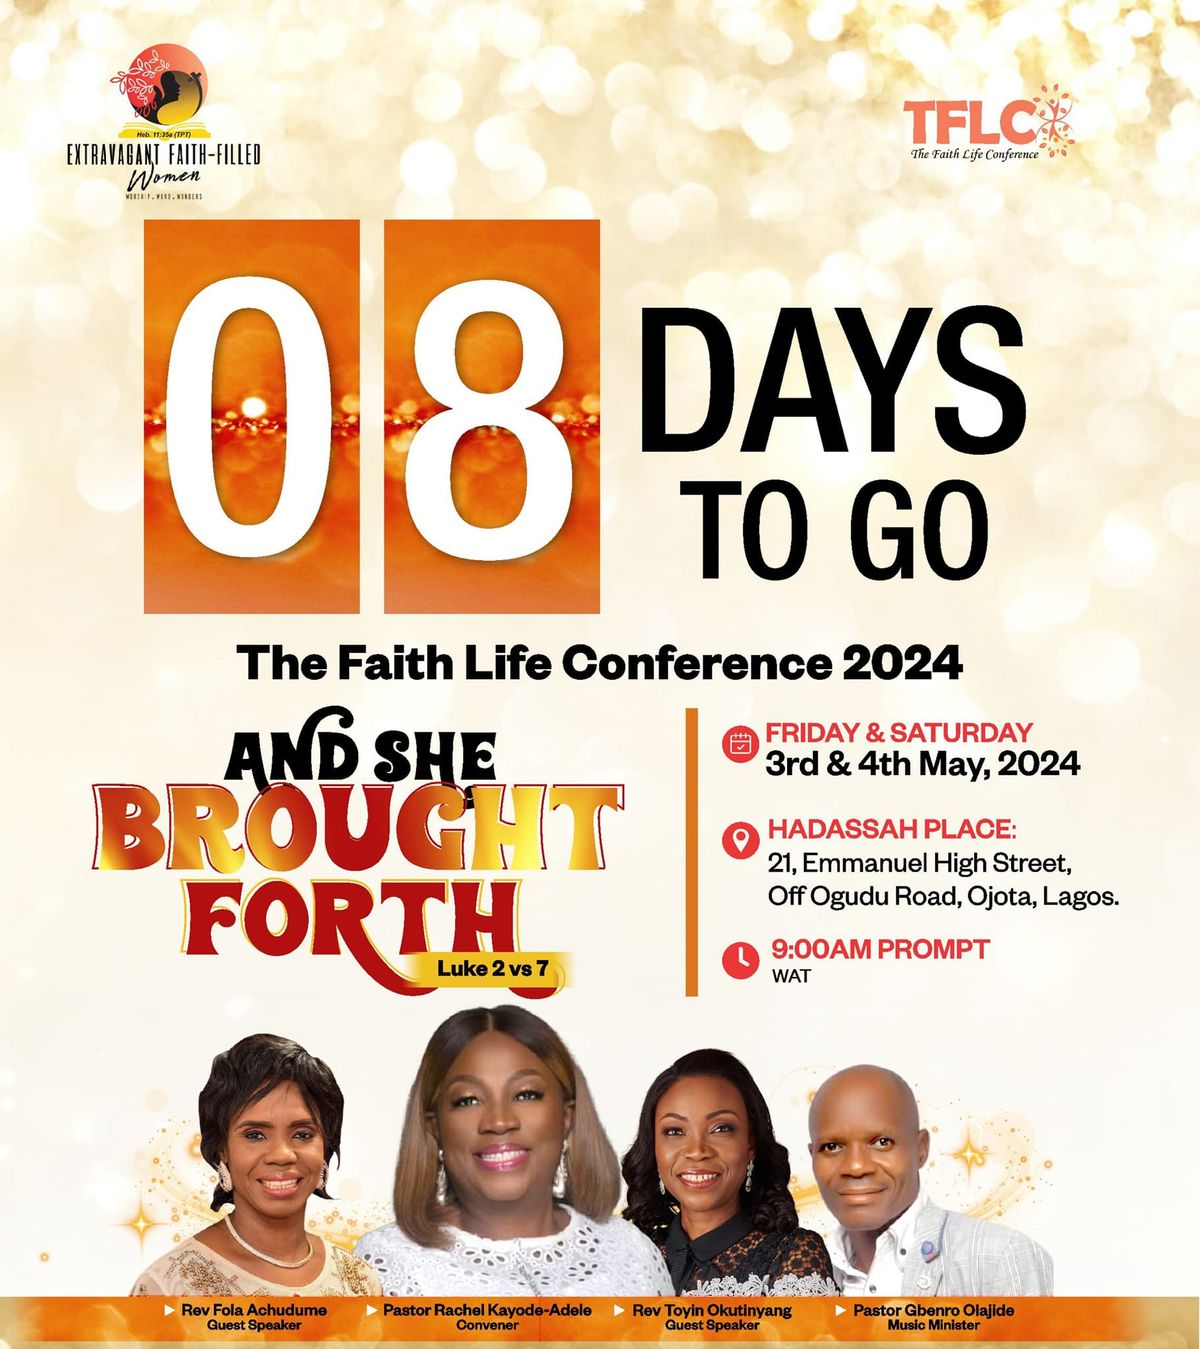 THE FAITH LIFE CONFERENCE 